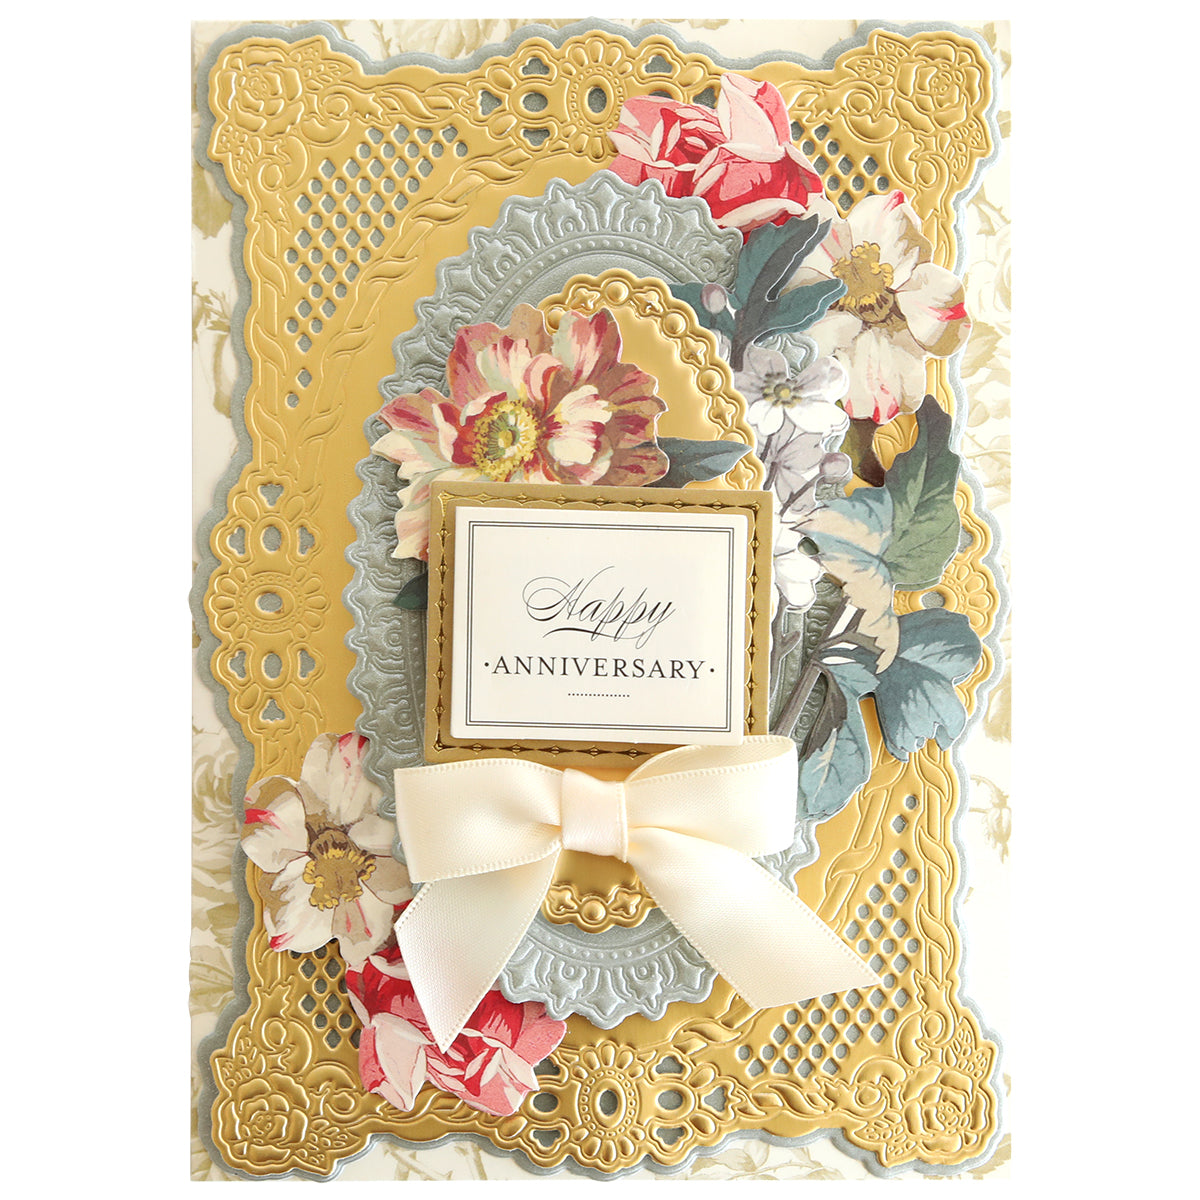 An ornate anniversary card with floral designs, a central ribbon bow, and embossed golden borders, featuring the text "Happy Anniversary" and additional embellishments created using Swing Out Dies.